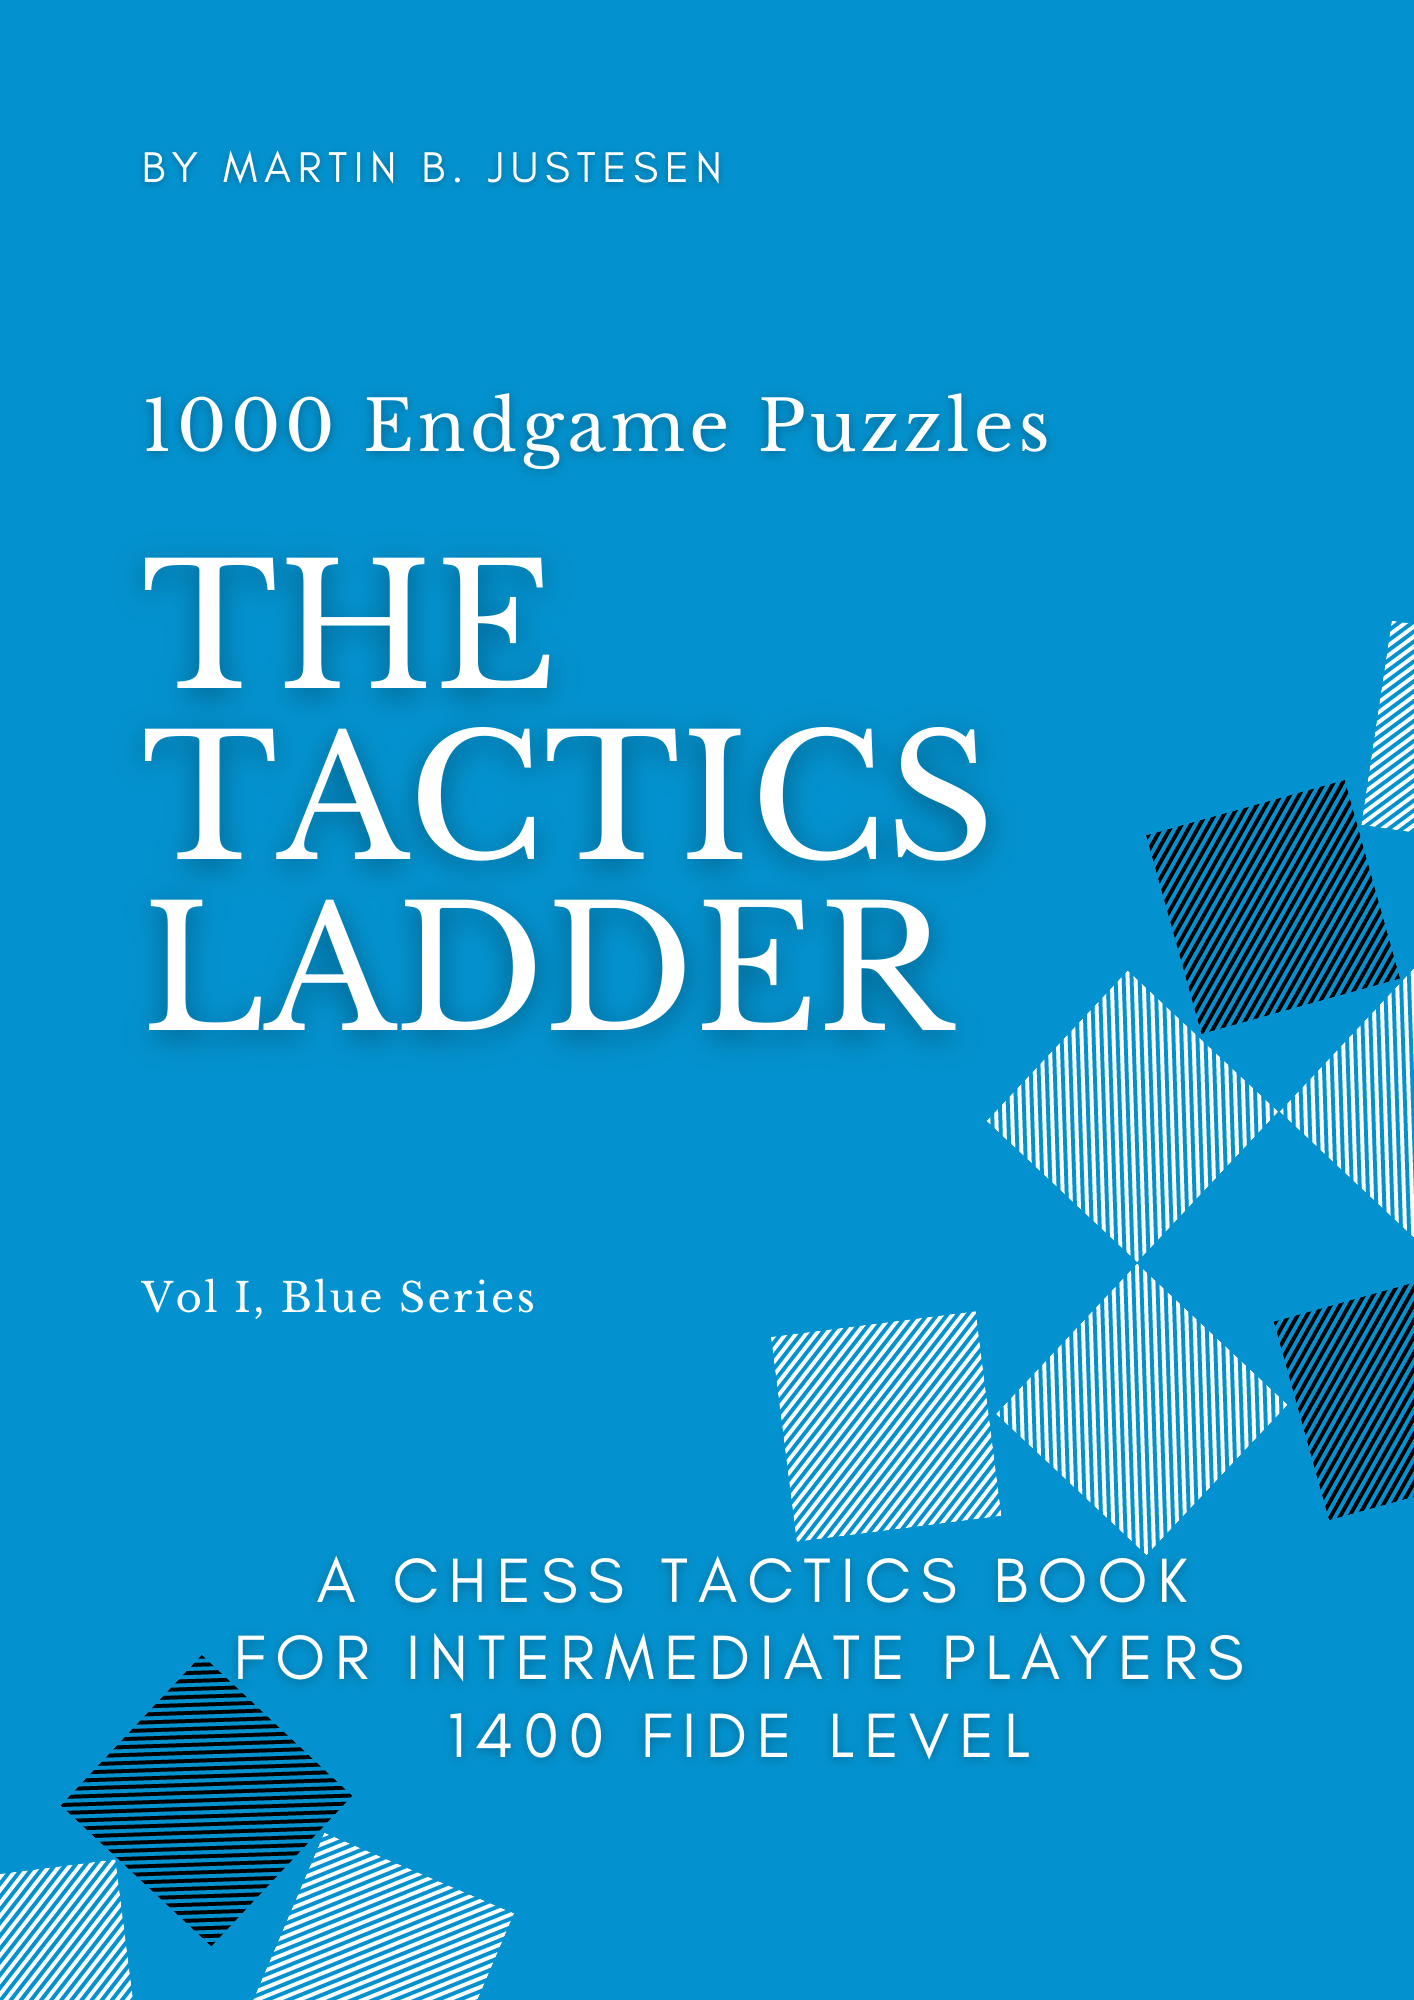 A Free 700-Page Chess Manual Explains 1,000 Chess Tactics in